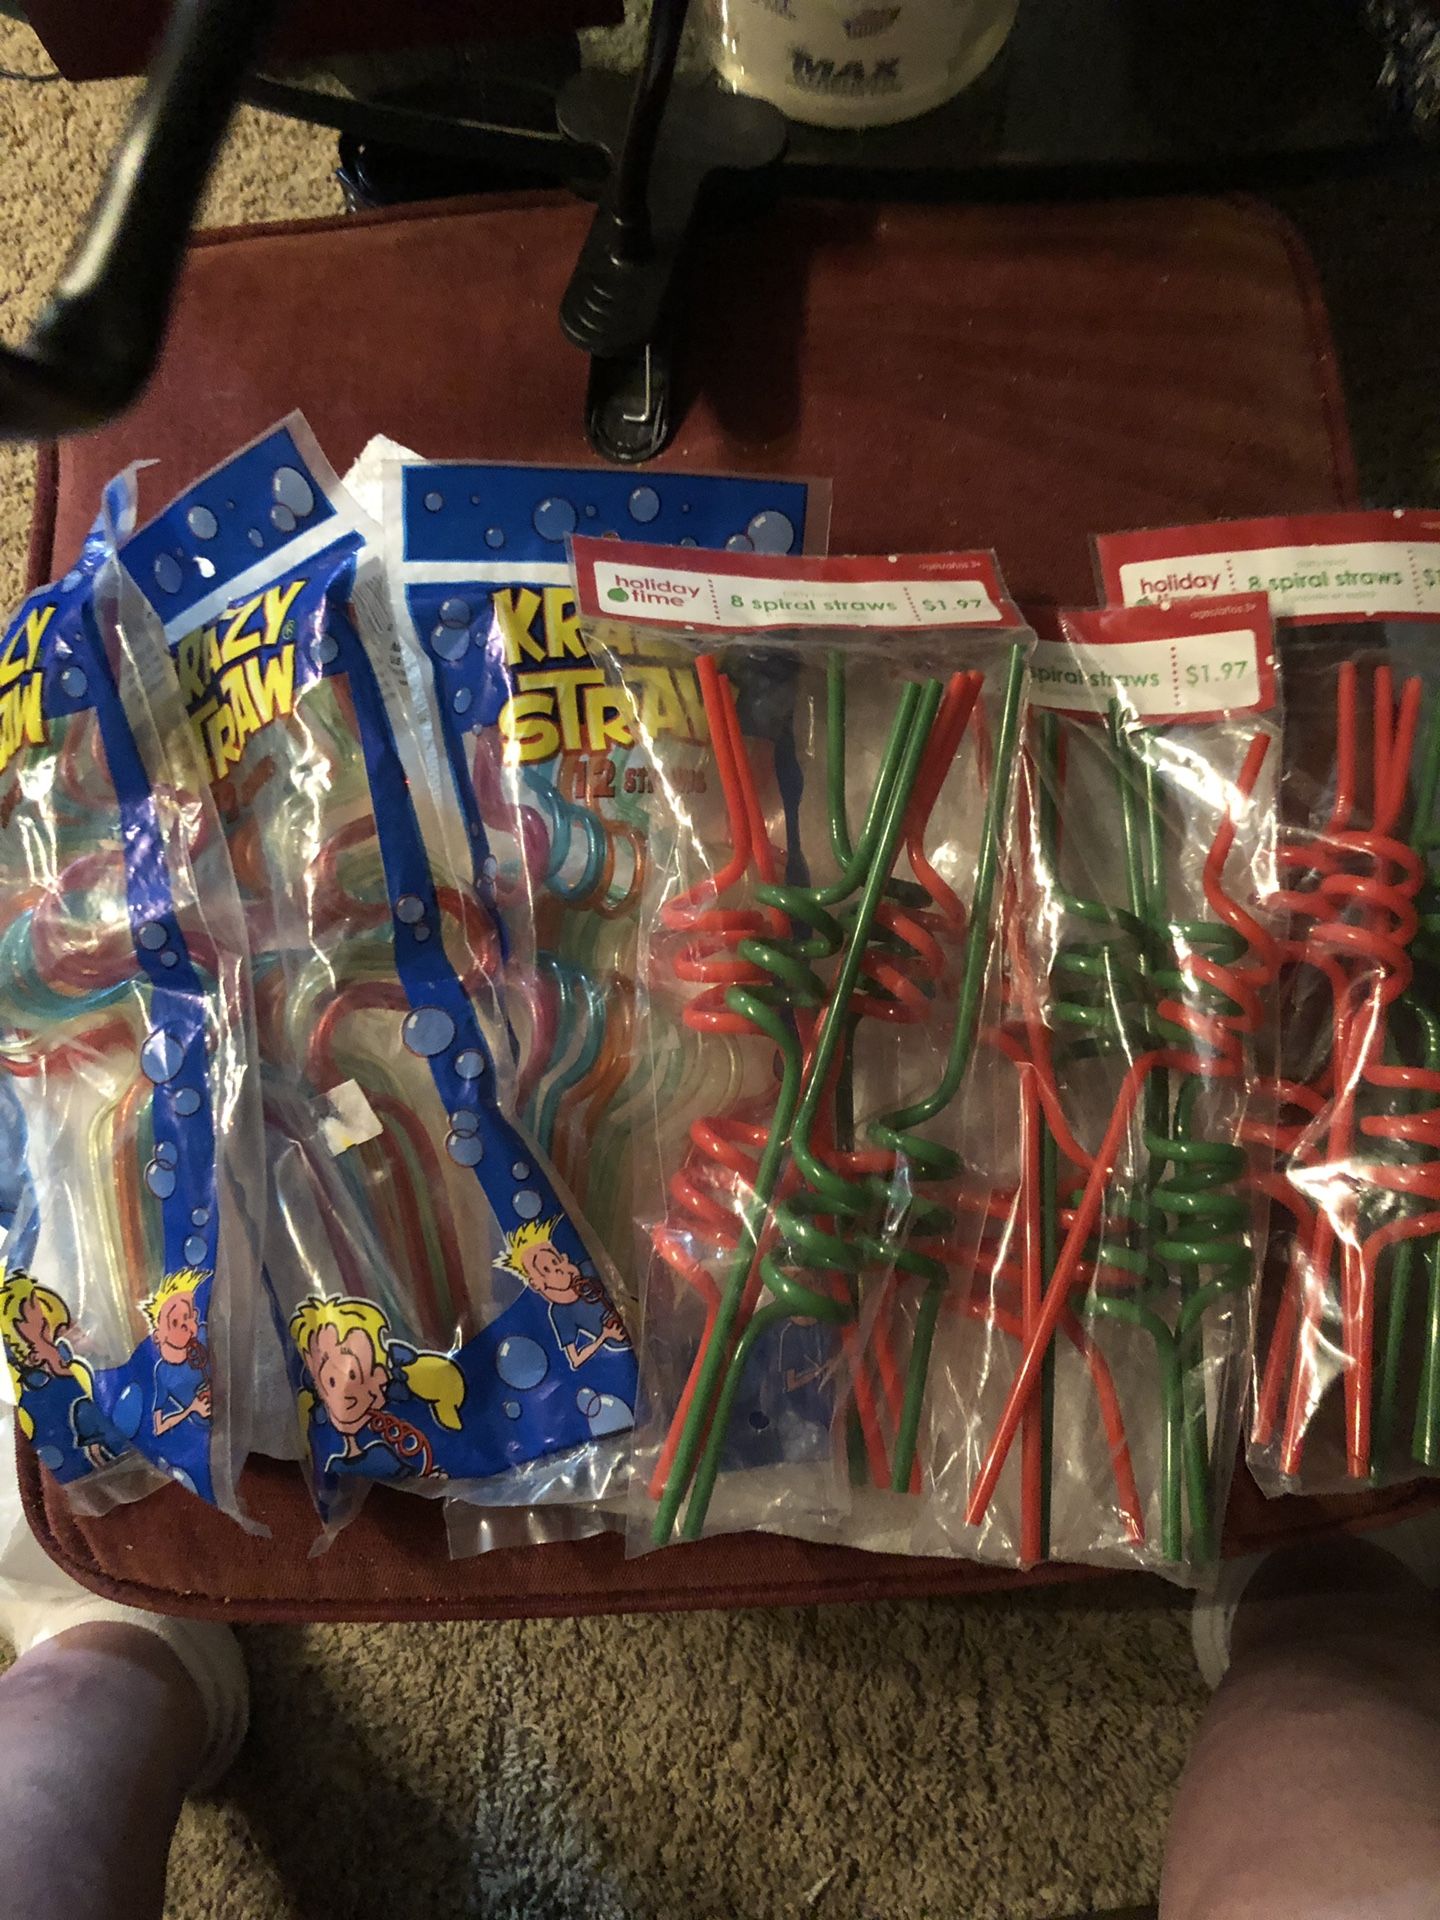 6 packs of Party Straws